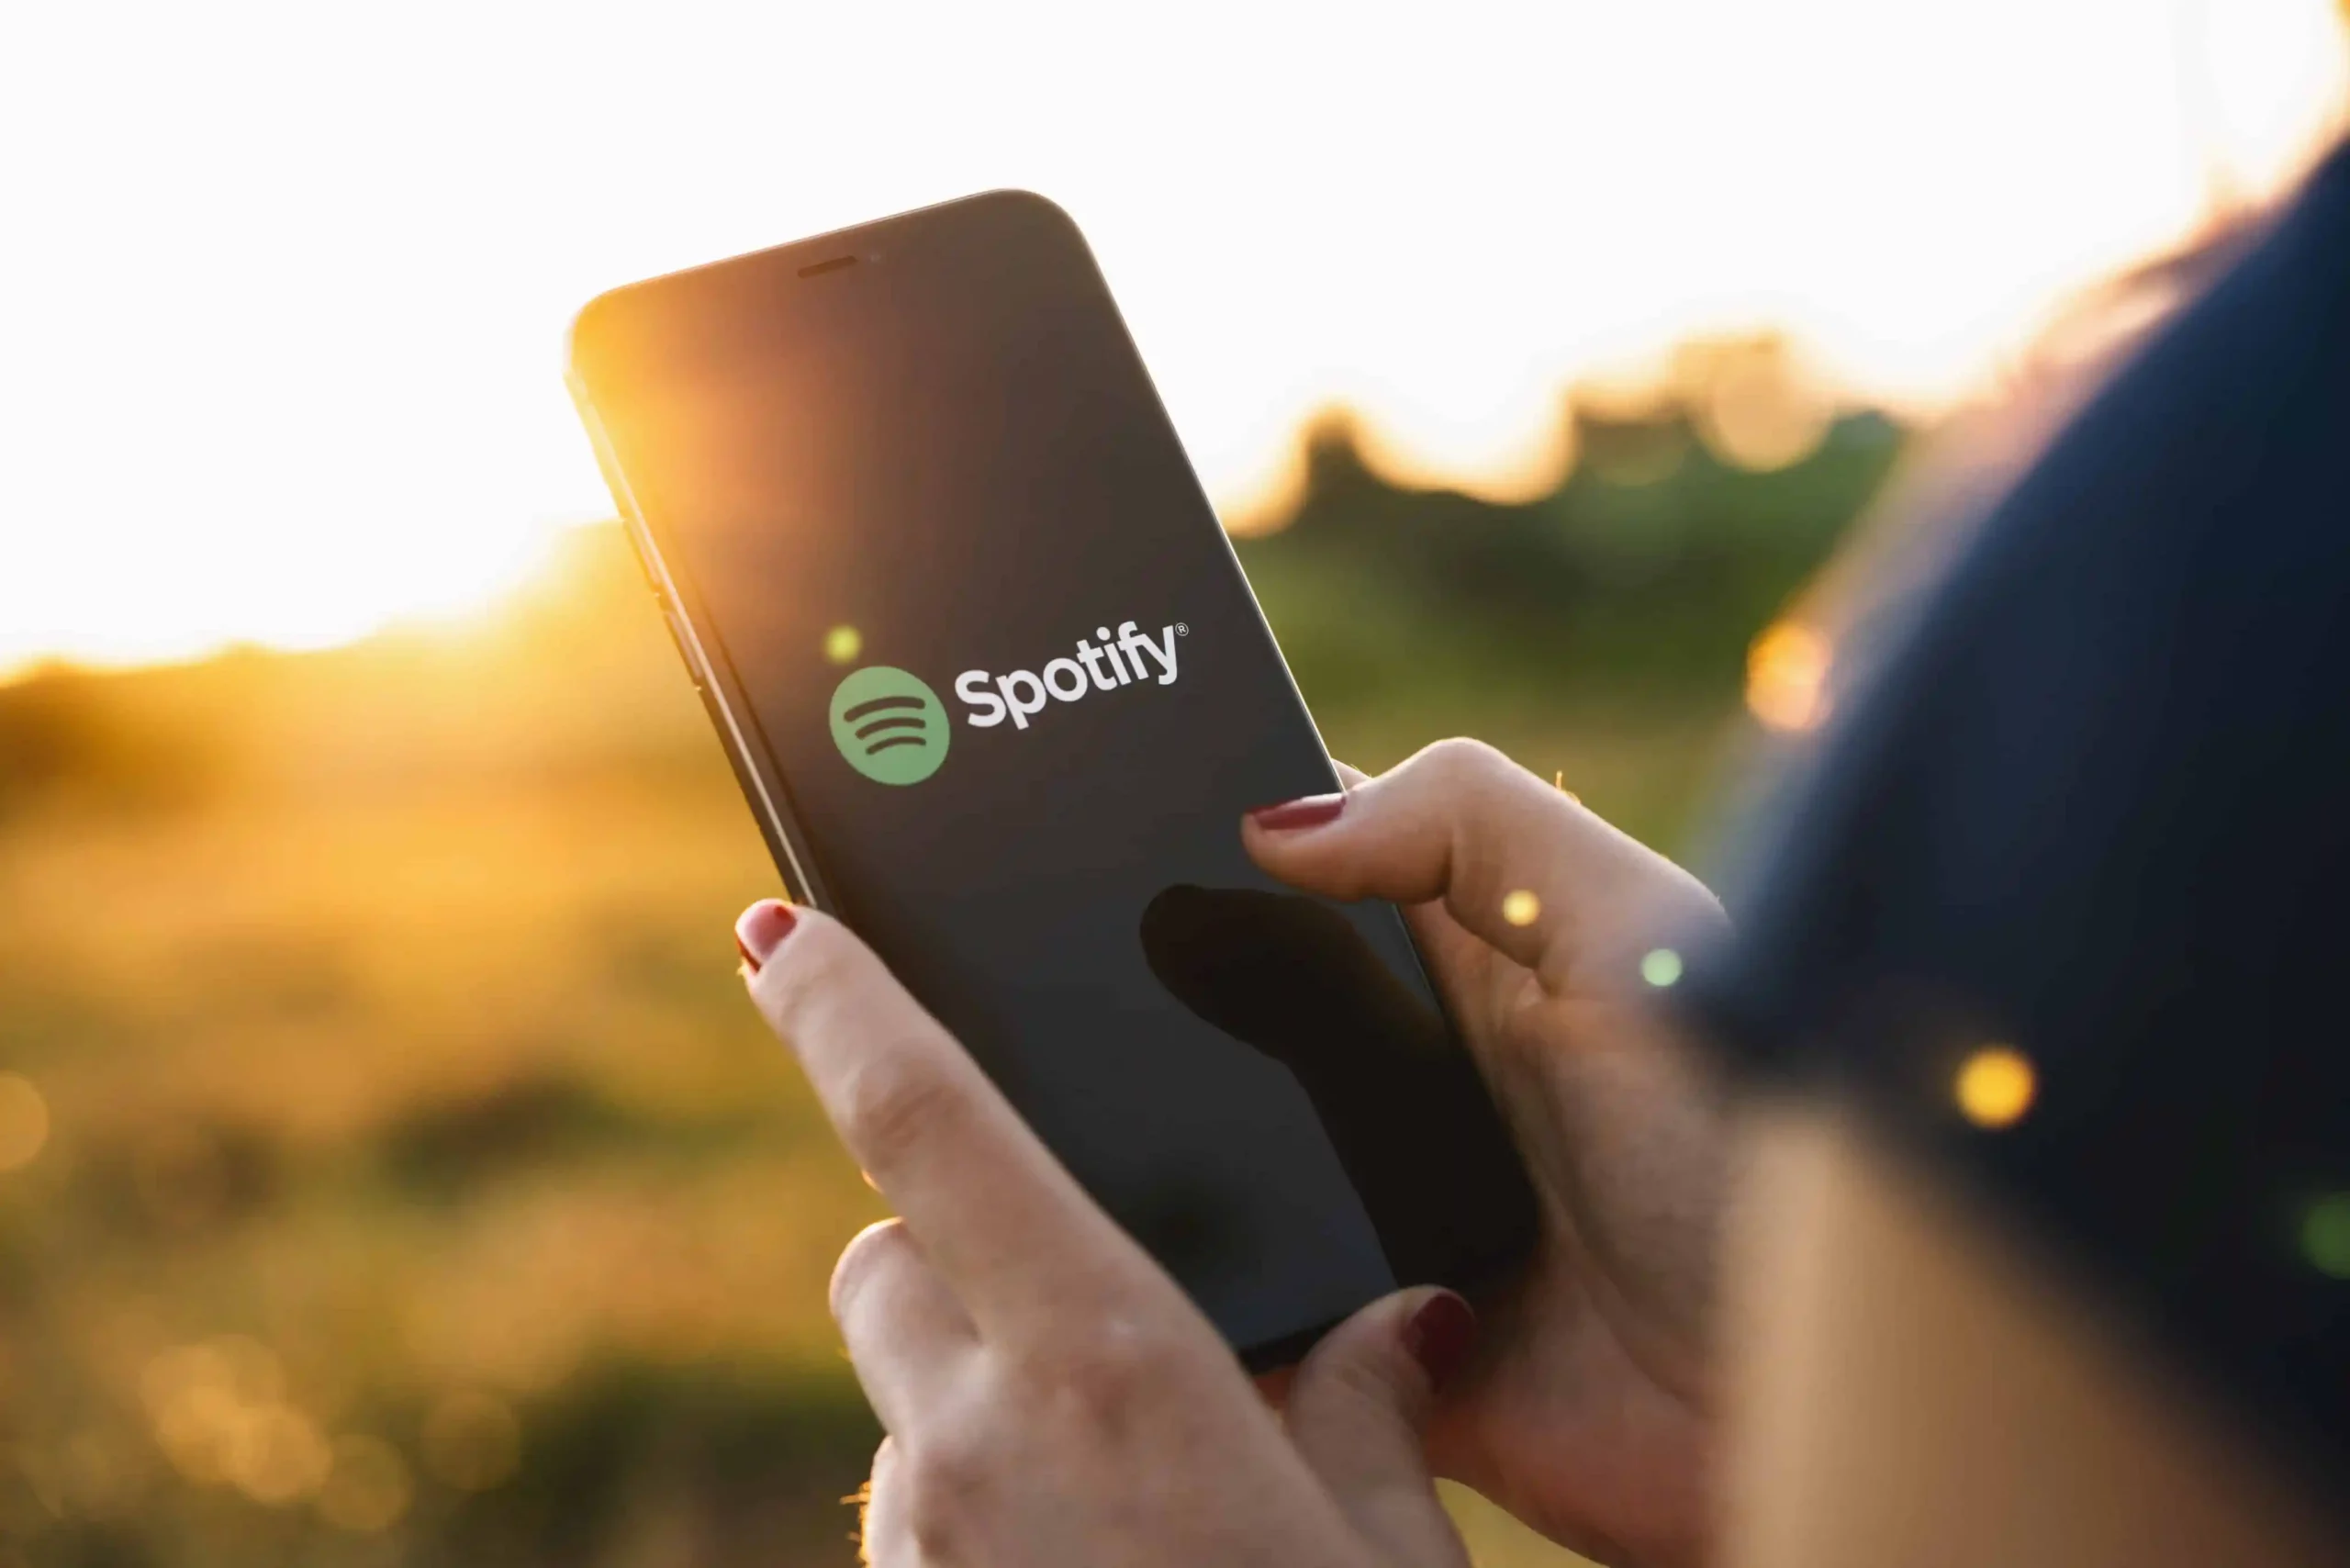 Spotify Is Officially Streaming Advertisements for Legal Flower Brands